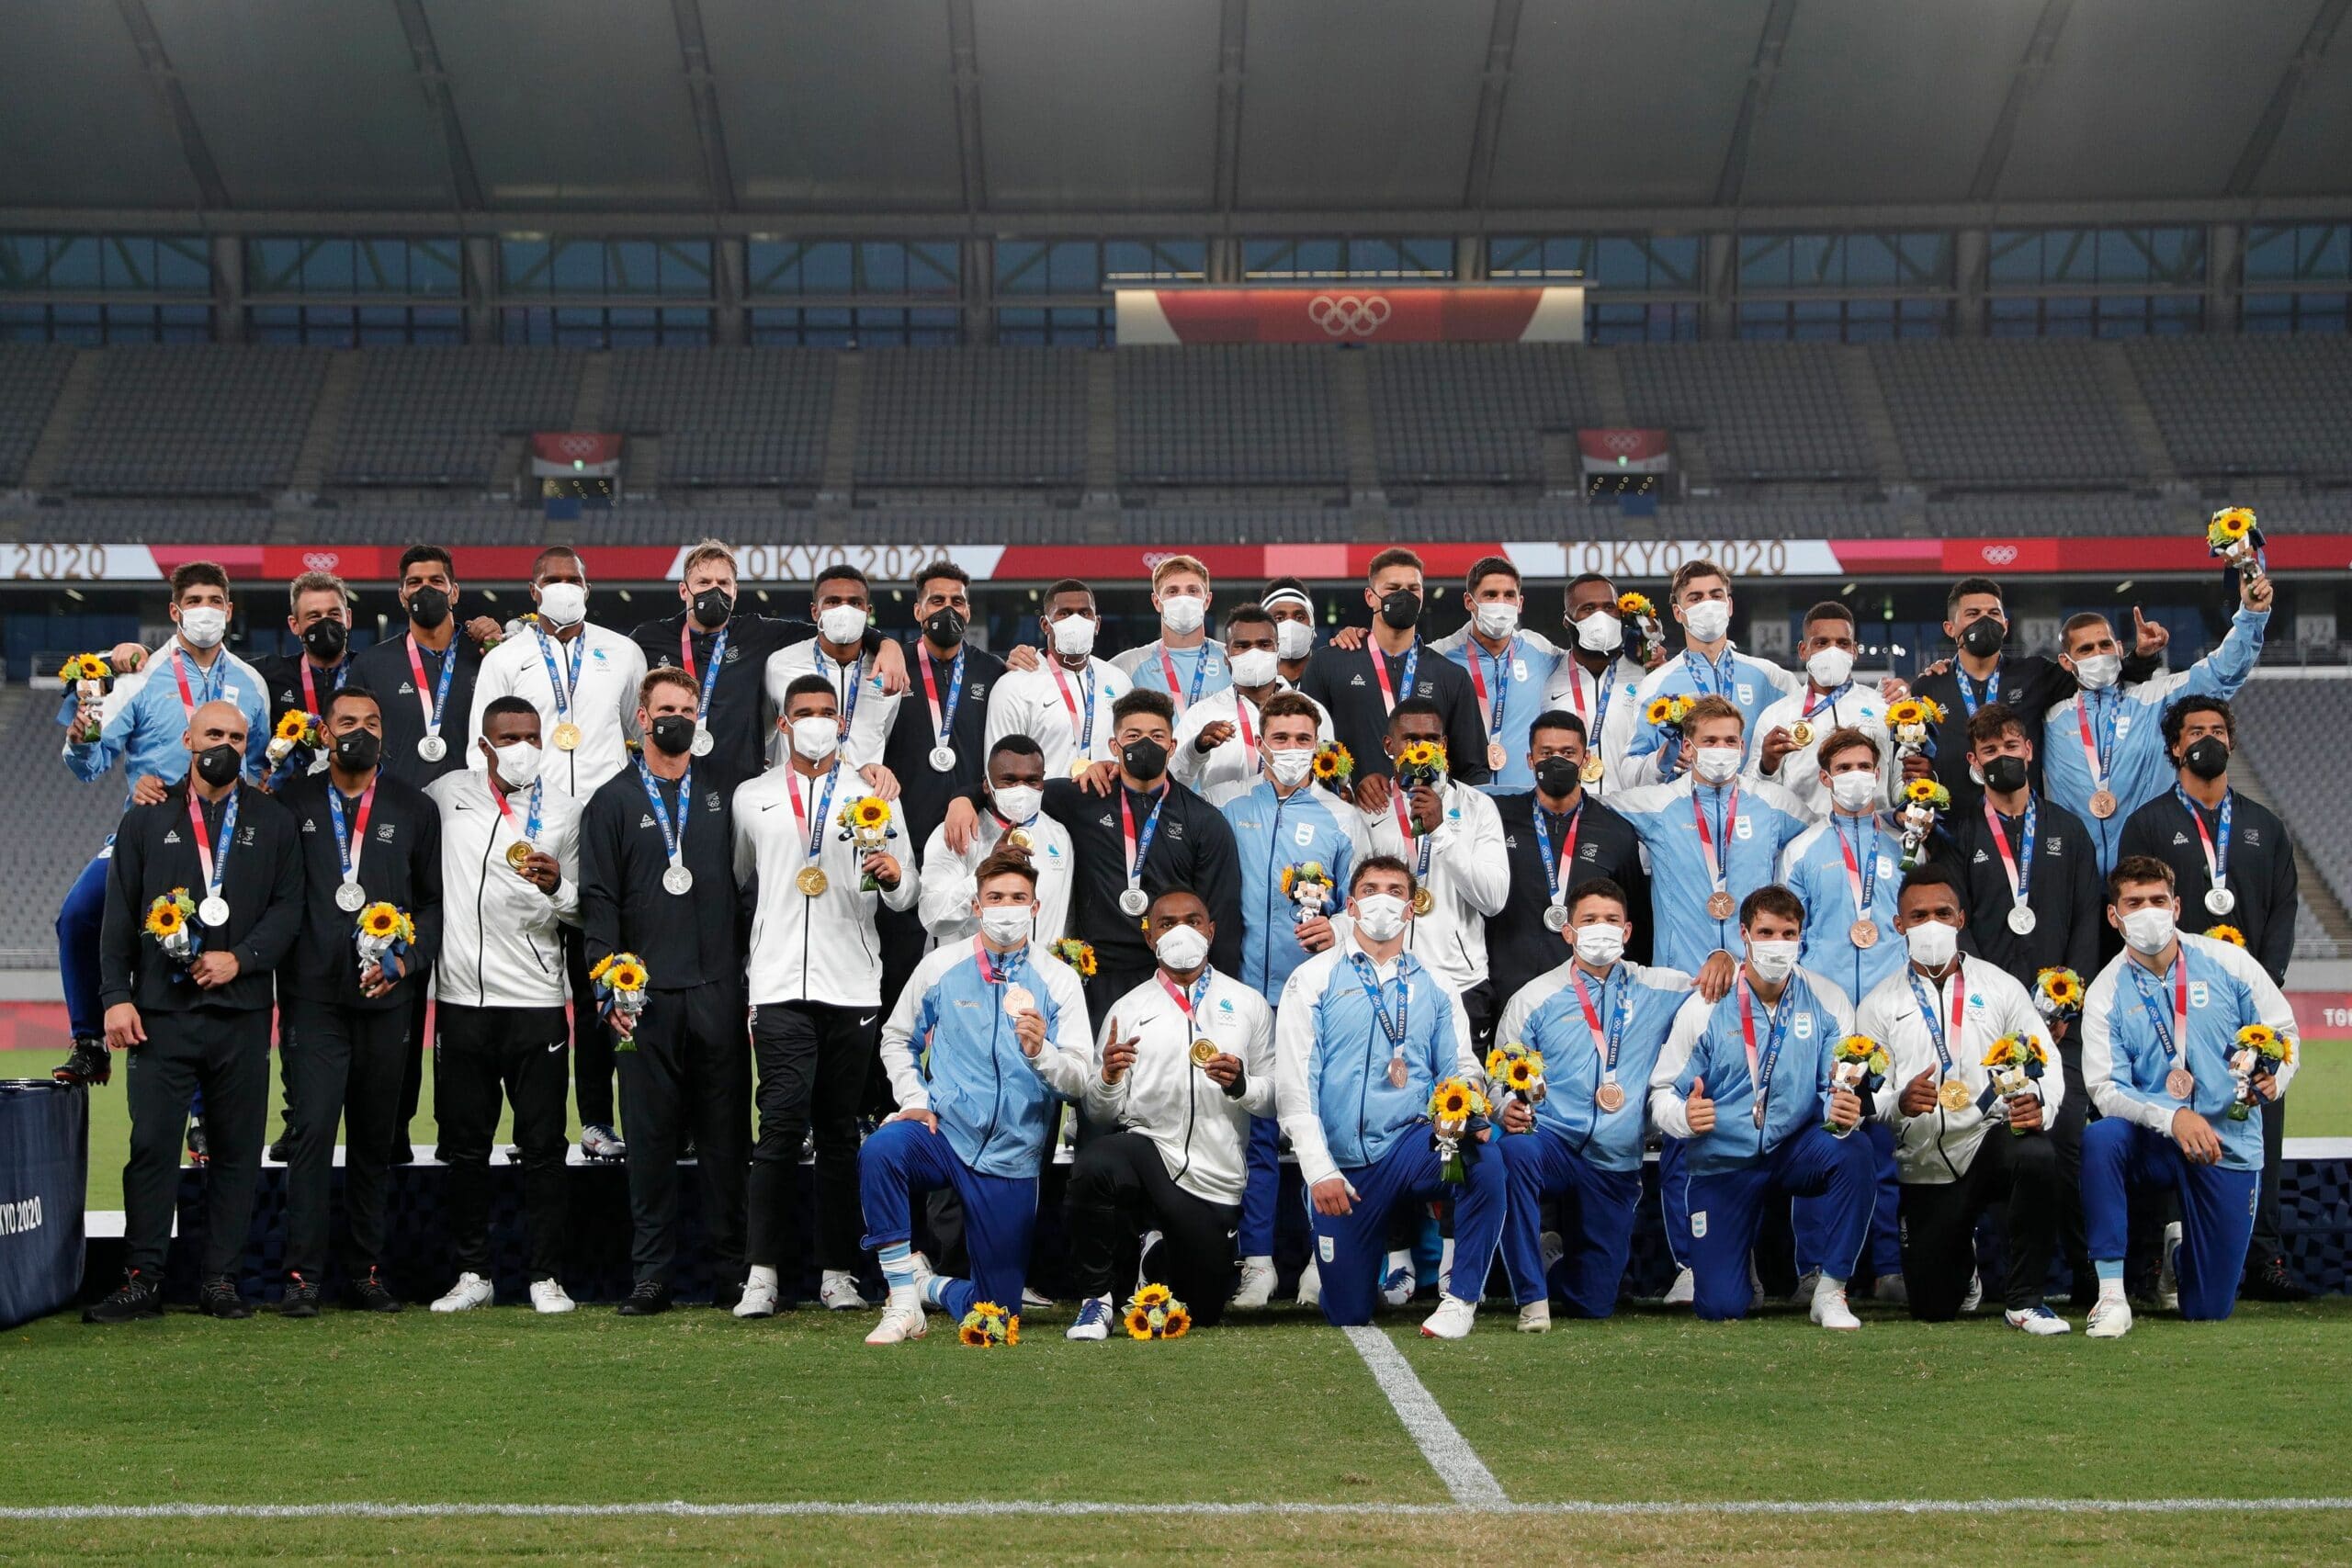 Fiji celebrate at the tokyo olympic games 2020 scaled